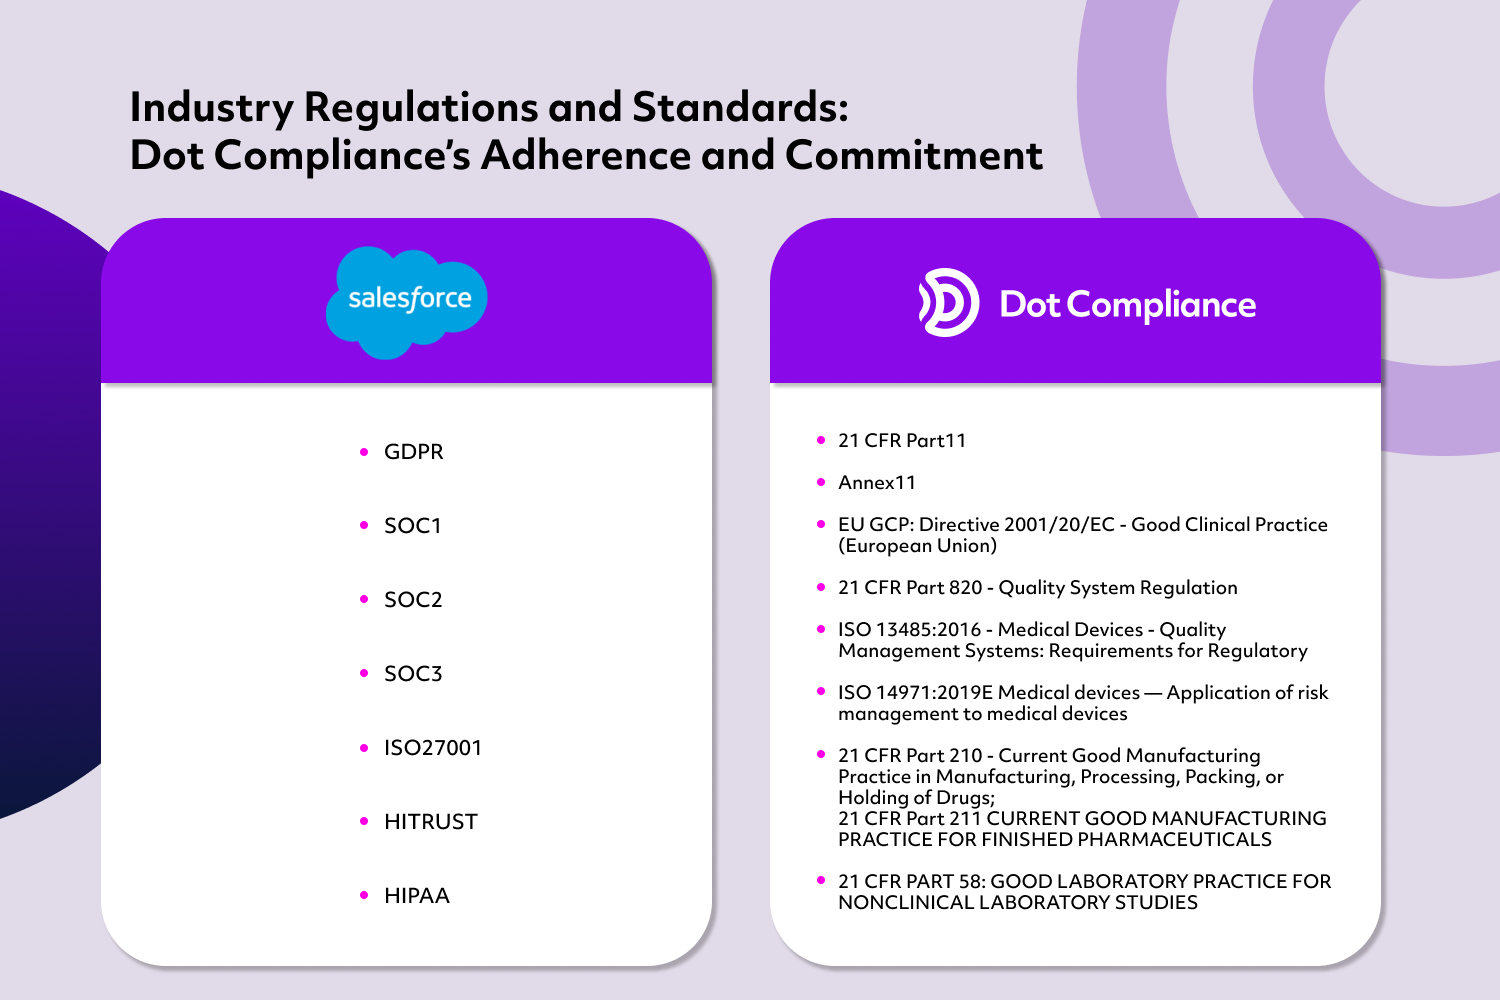 Dot Compliance Software - Adherence and Commitment